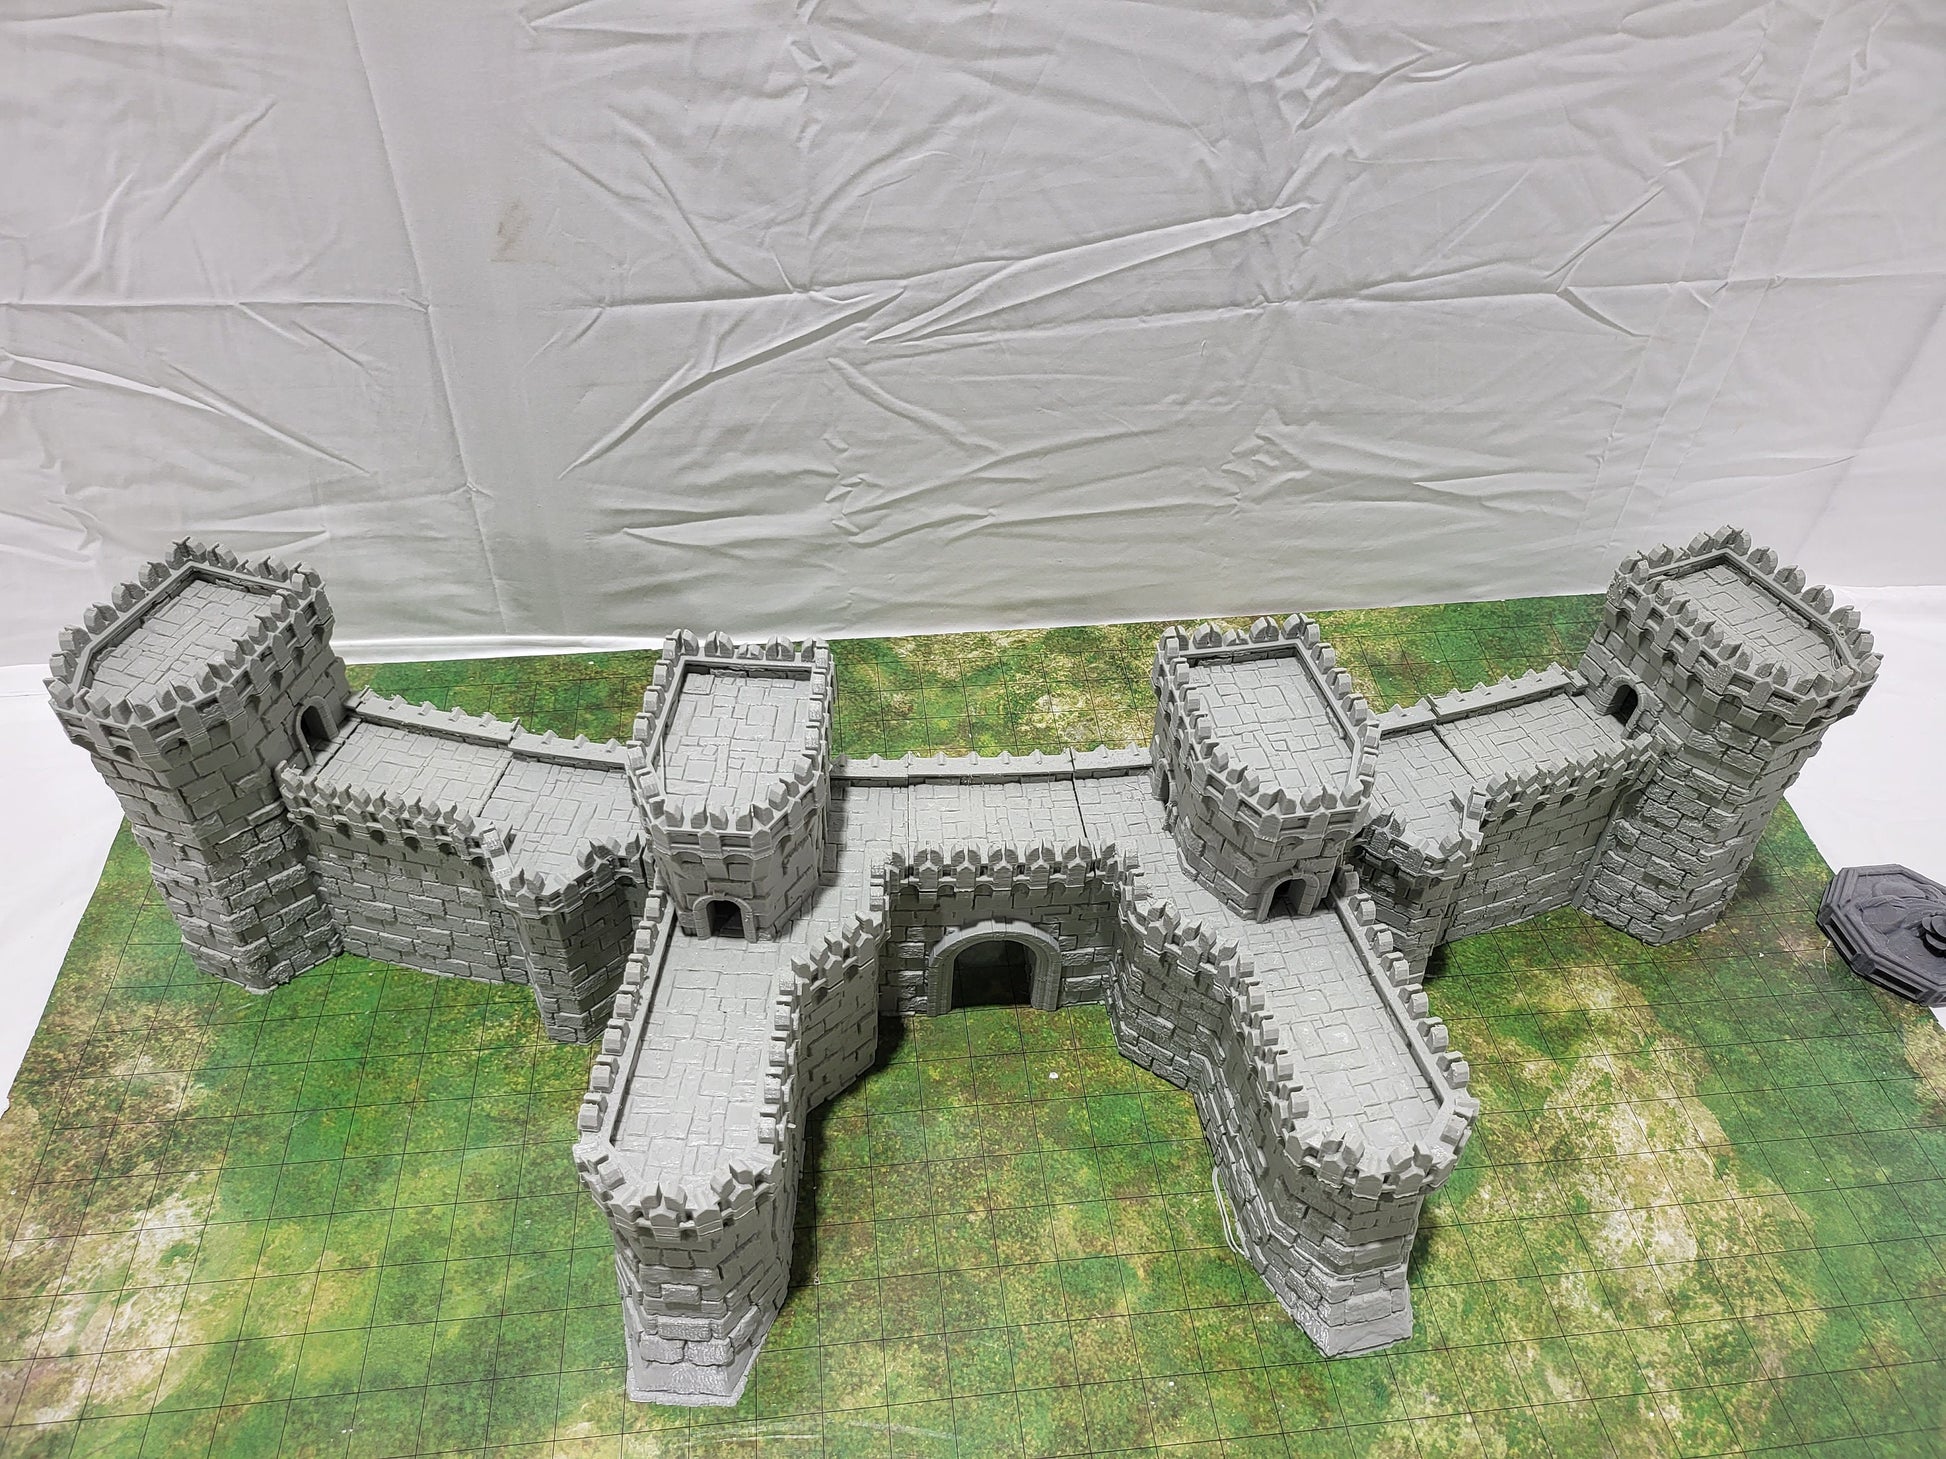 15mm Ivory Citadel Walls, The Outer Wall, Walls, Dungeons and Dragons, 15mm Terrain, Citadel